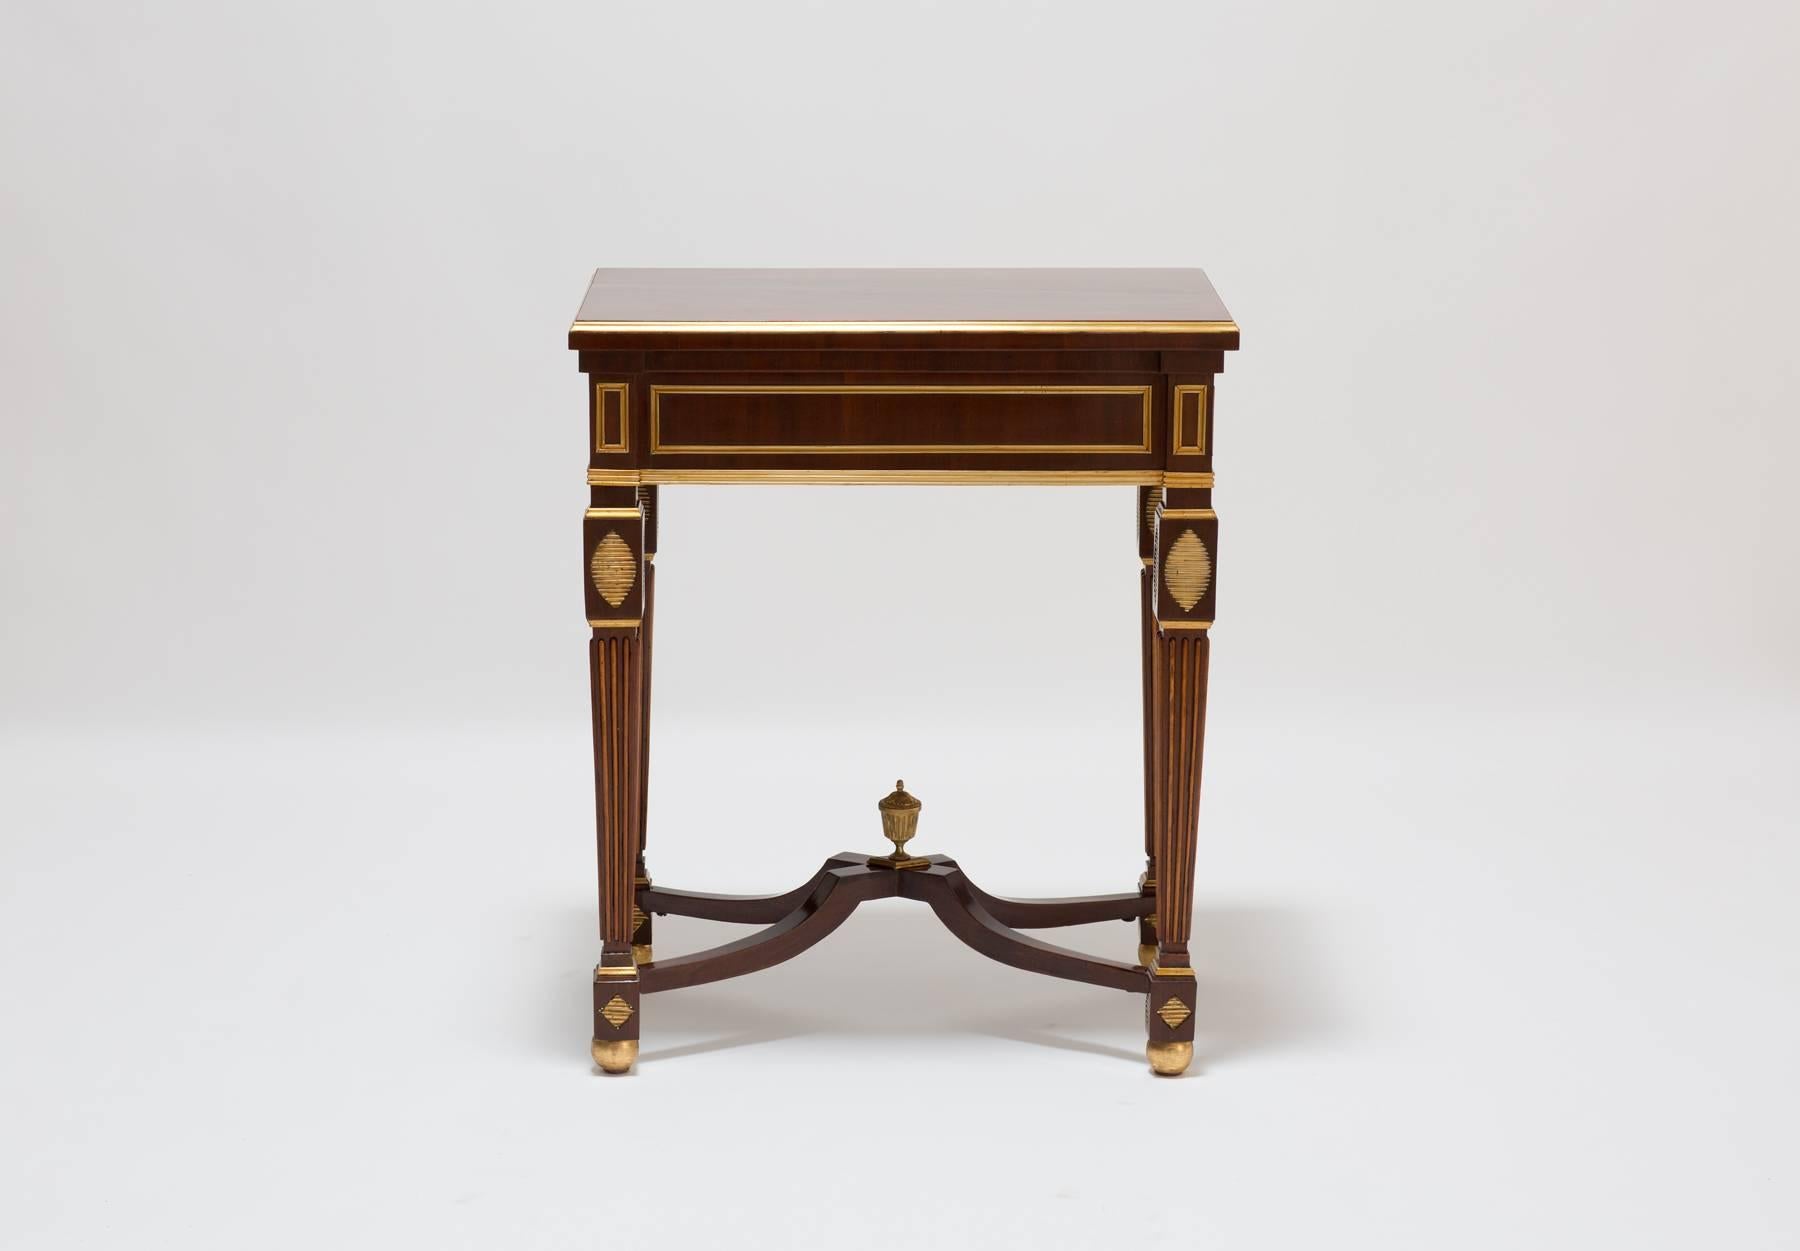 Louis XVI Antique Classicism Russian Mahogany Table with Brass, 18th Century For Sale